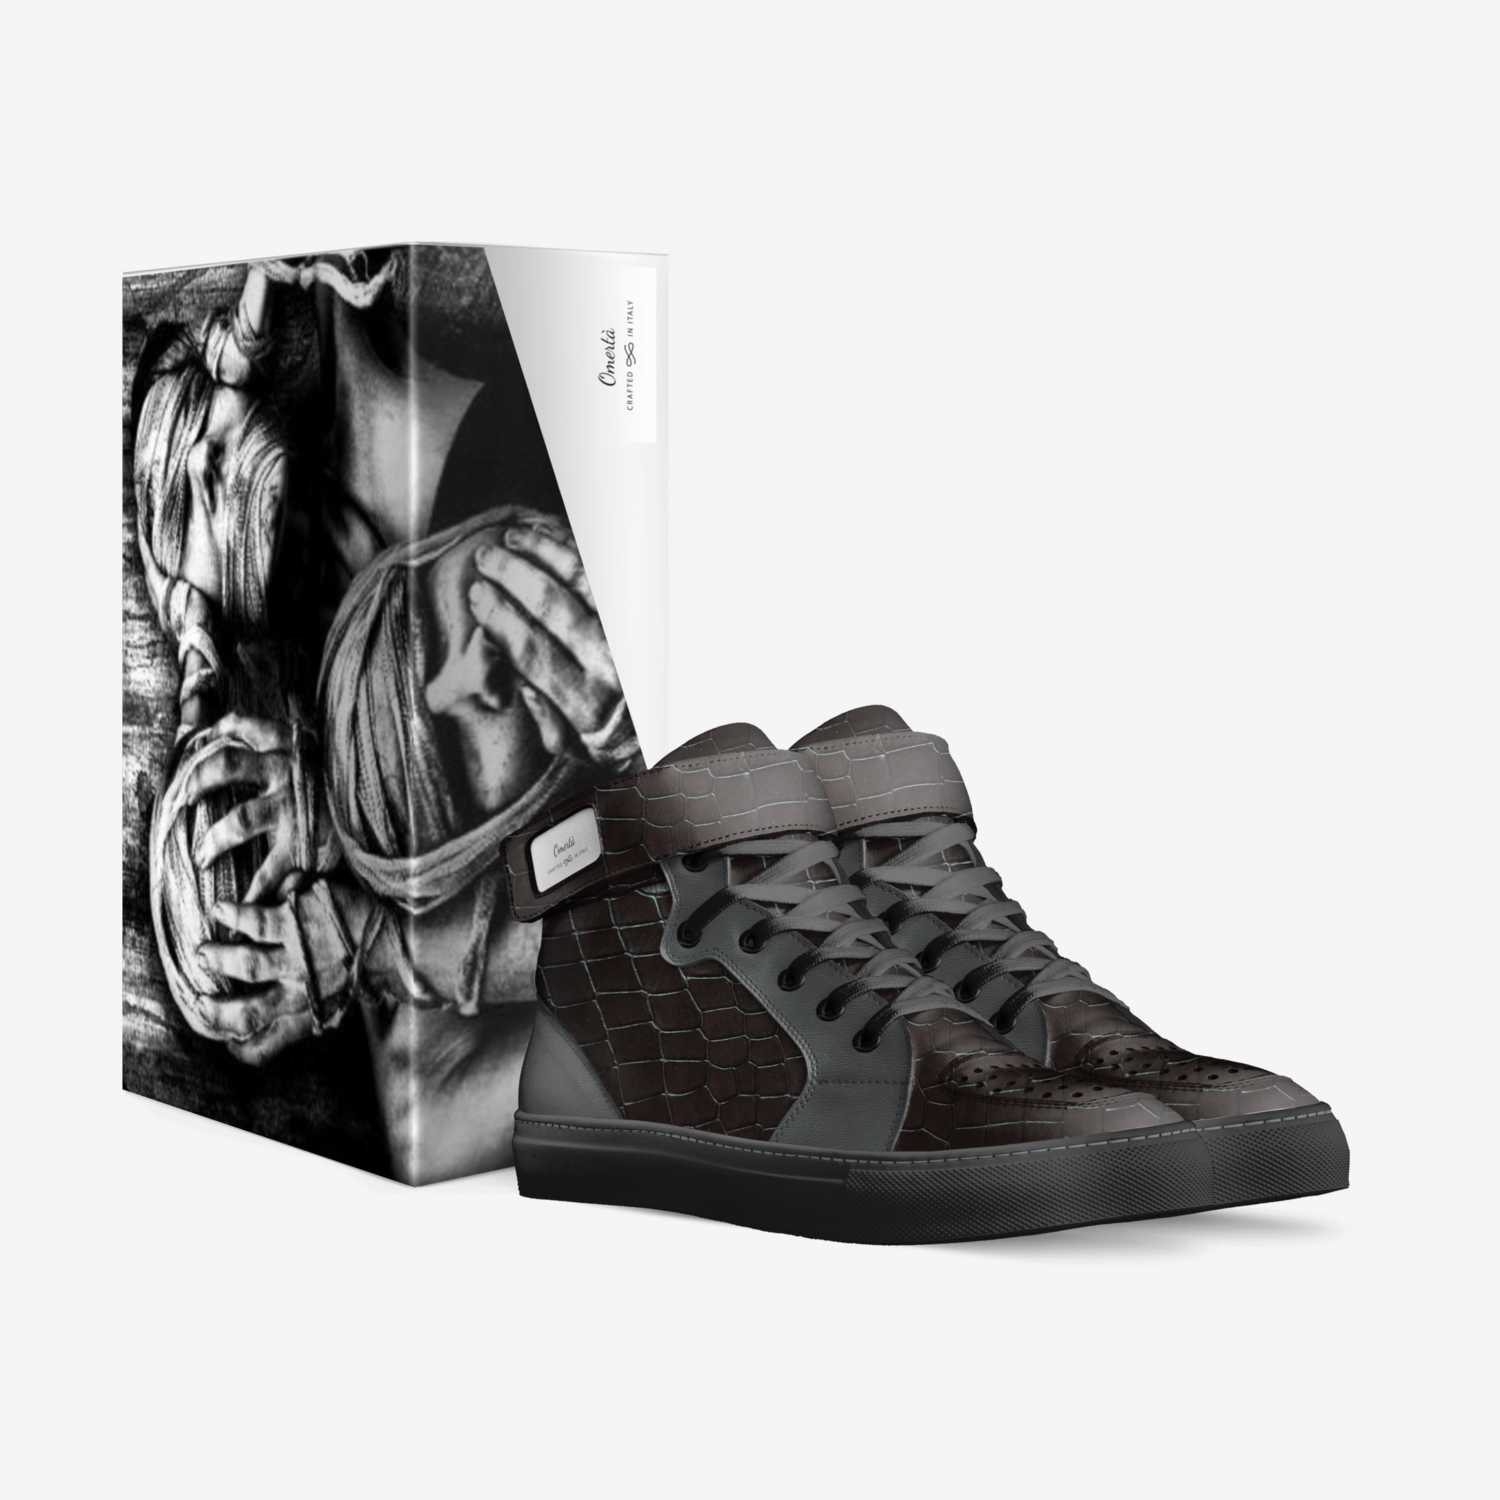 Omertà  custom made in Italy shoes by Corey Wellman | Box view